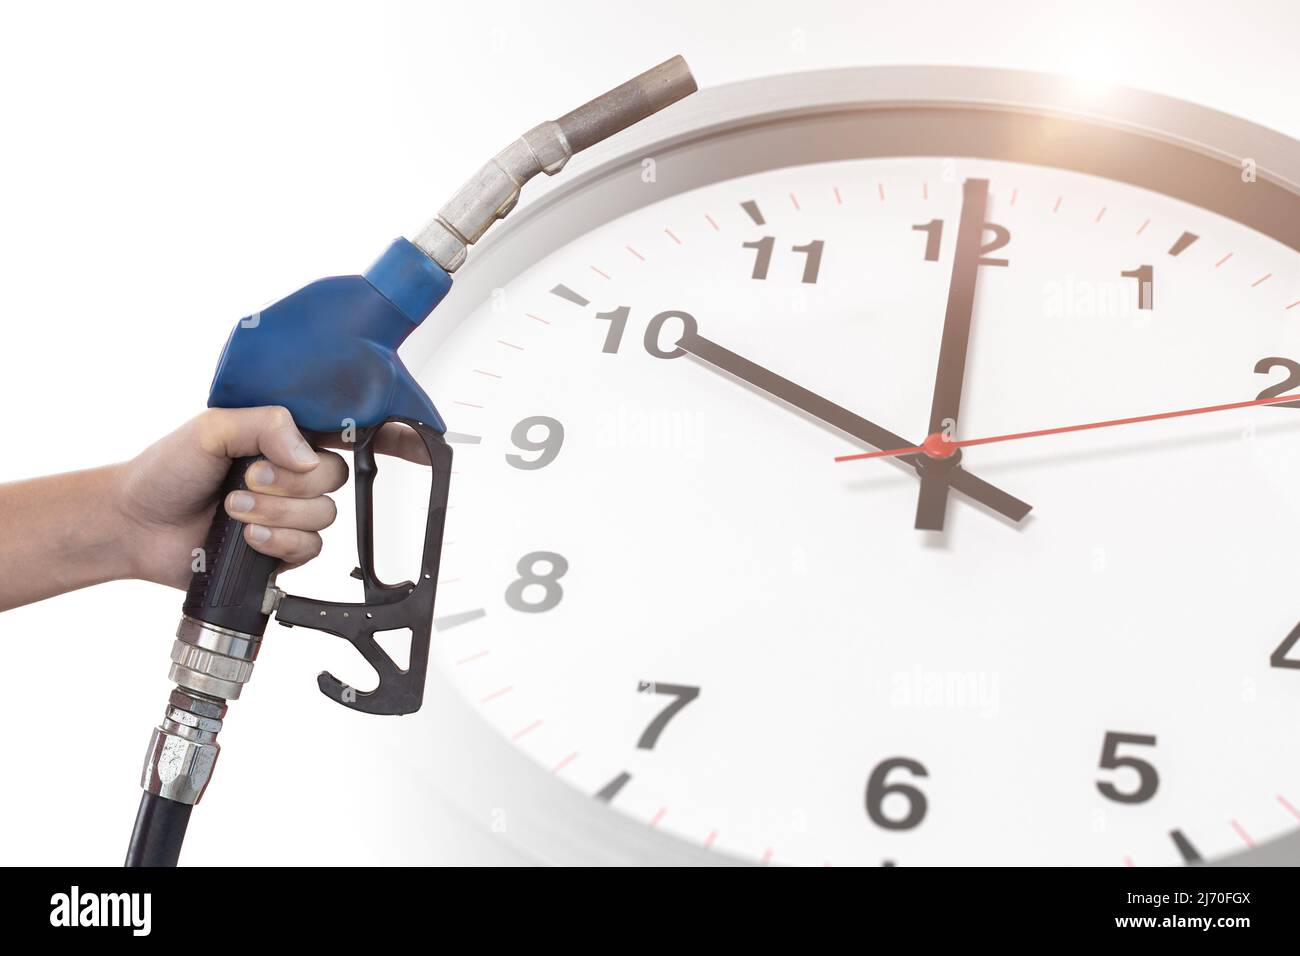 Fuel nozzle overlay with time clock for Fossil Oil Gasoline run out countdown timing concept. Stock Photo